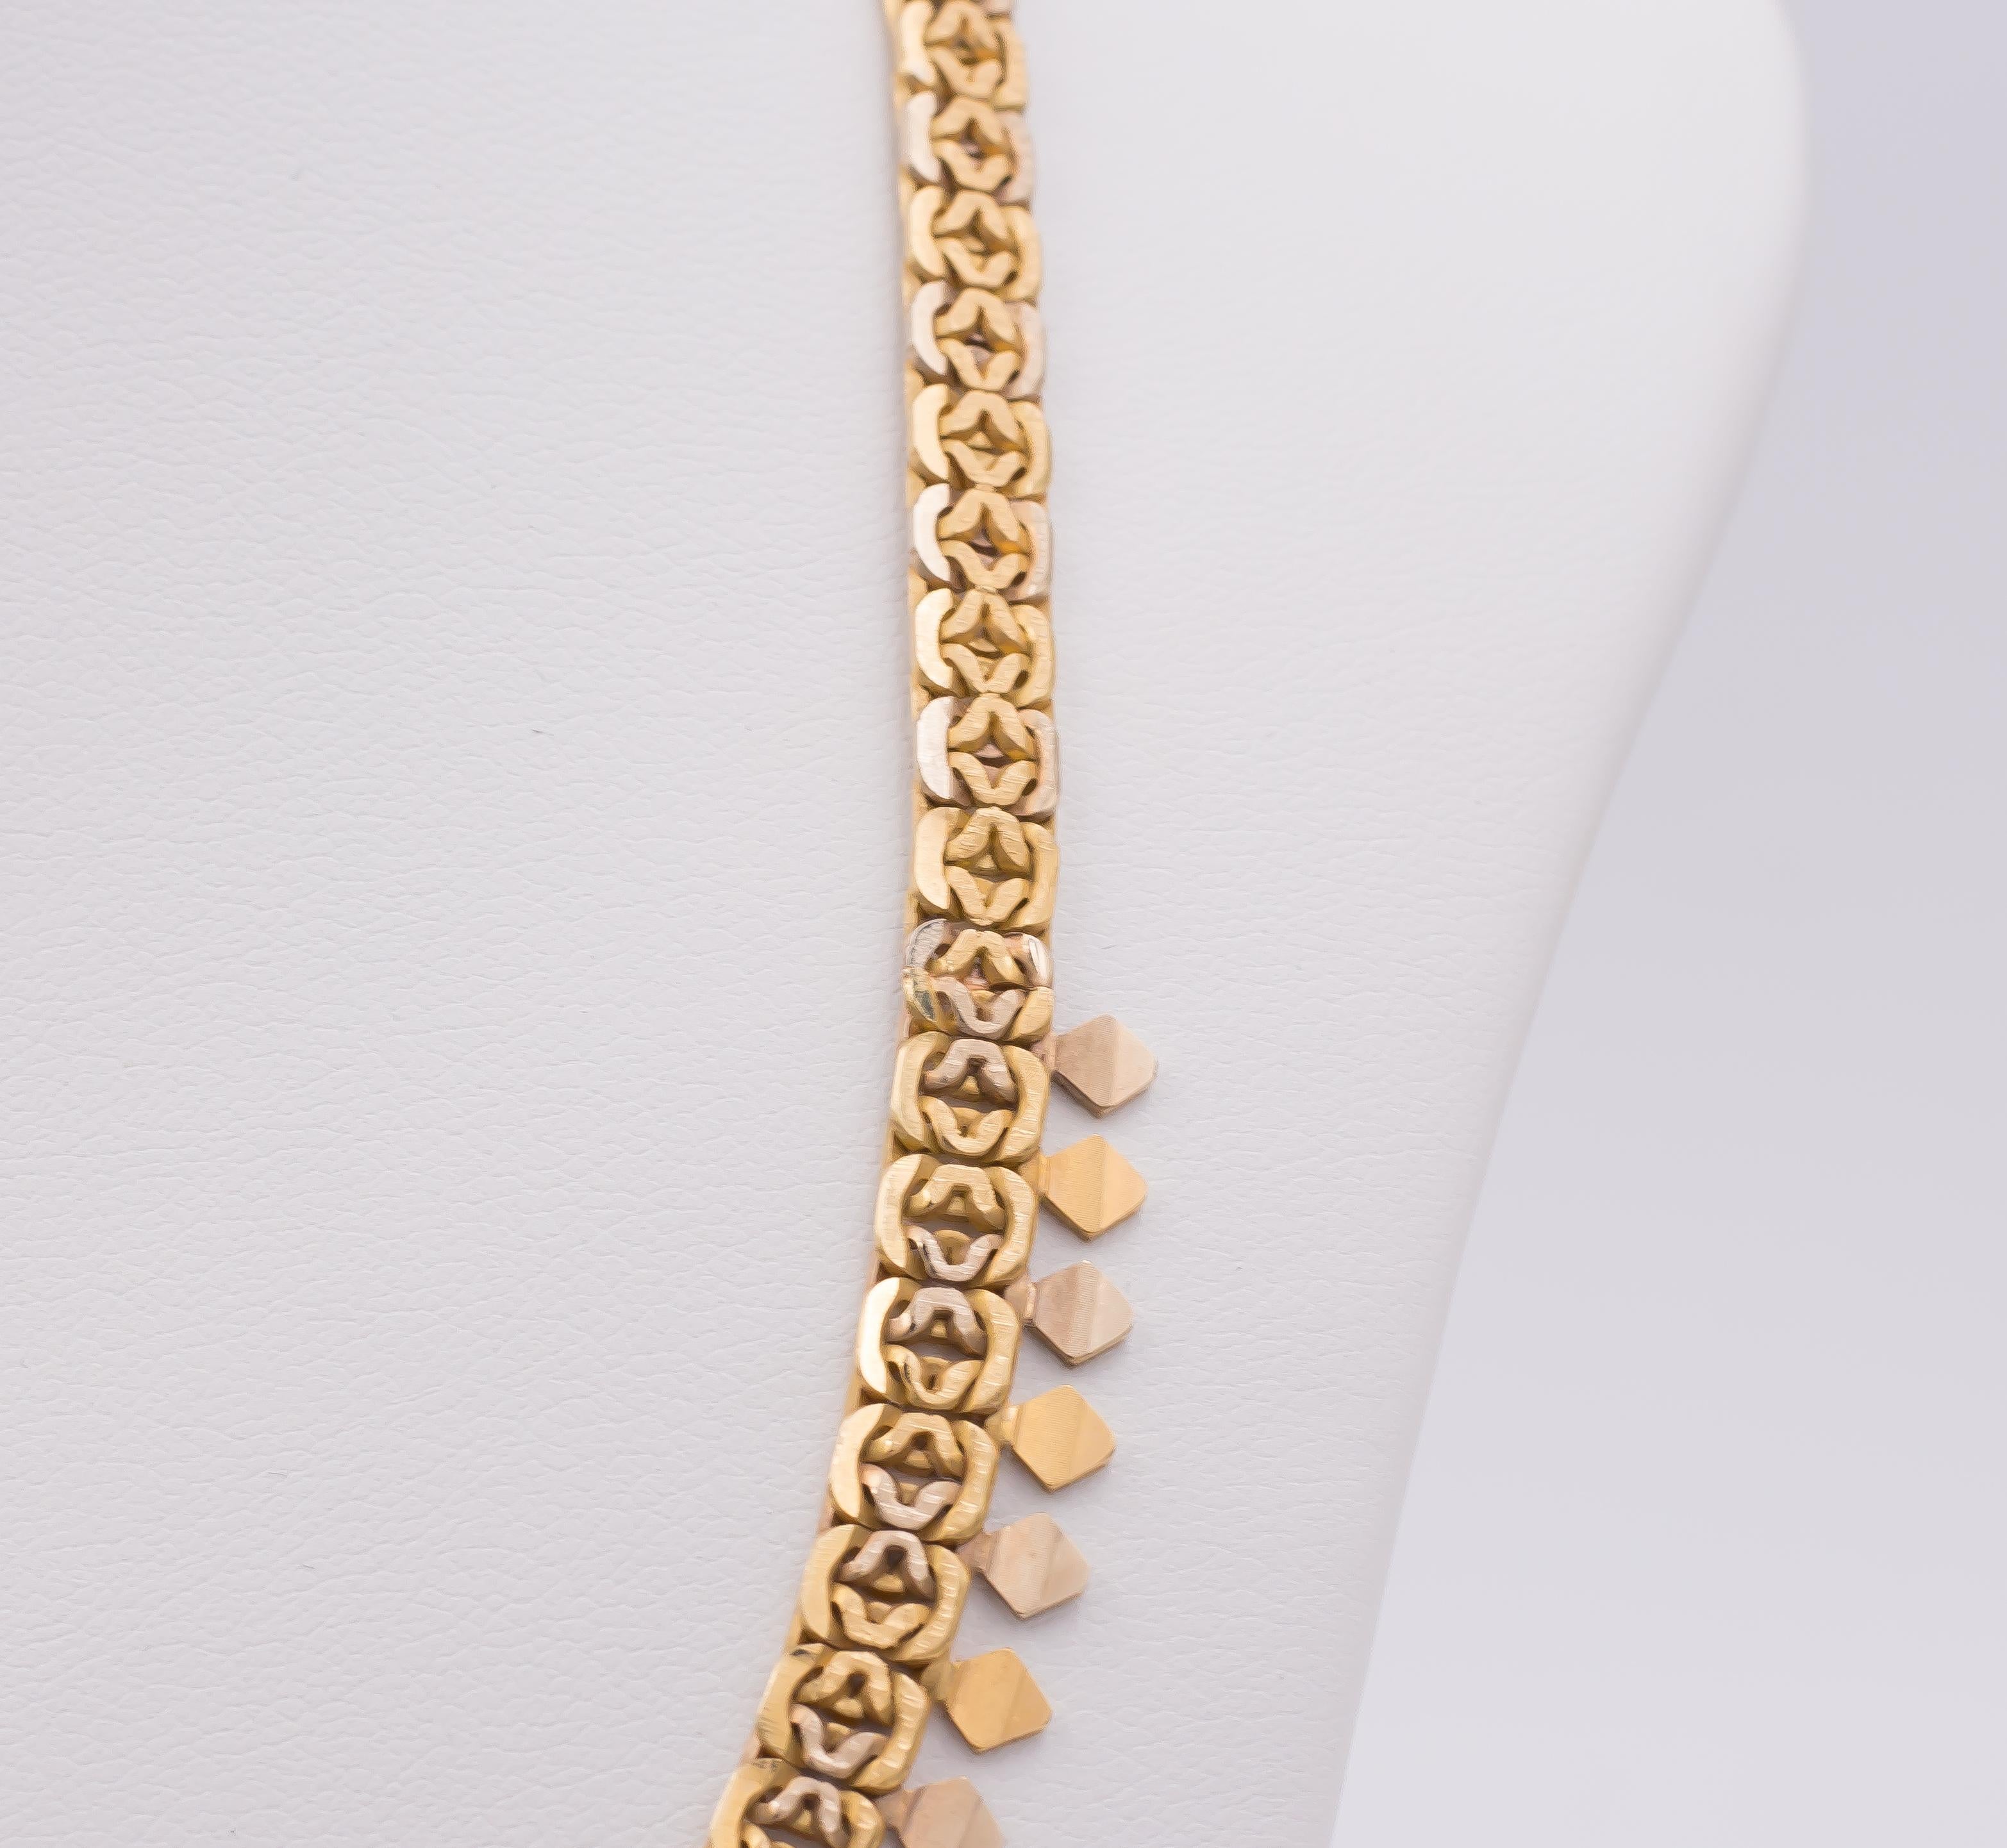 This very elegant antique necklace is modelled in gold throughout and it is decorated with some little gold pendants. 
The collier dates from the 1940s.

MATERIALS
Gold

DIMENSIONS
Length: 42 cm

WEIGHT
34.4 g